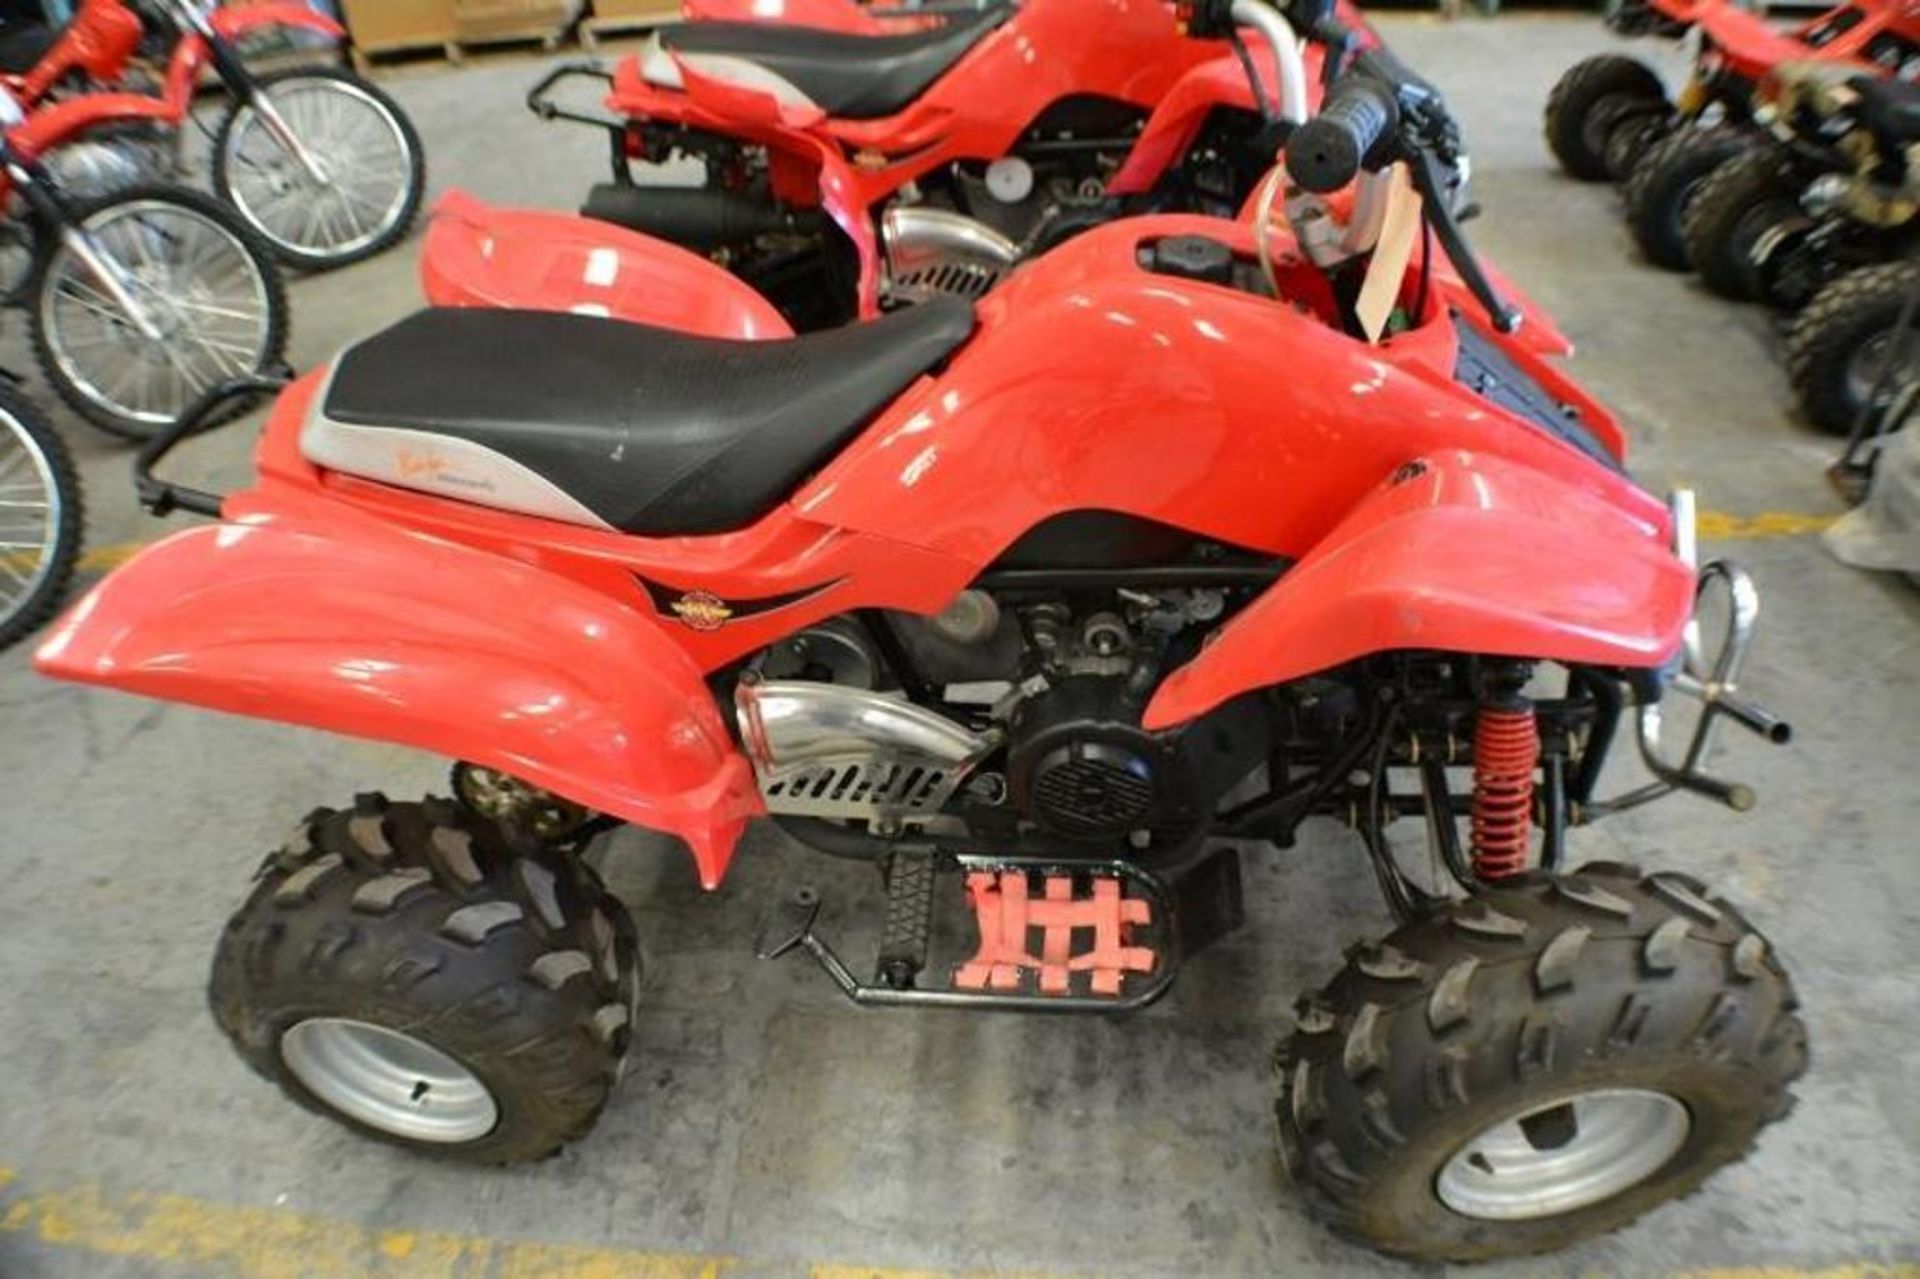 ATV 150cc 4 Stroke. Red Color. For Repair. This unit are for EXPORT ONLY. Buyers acknowledges is for - Image 5 of 11